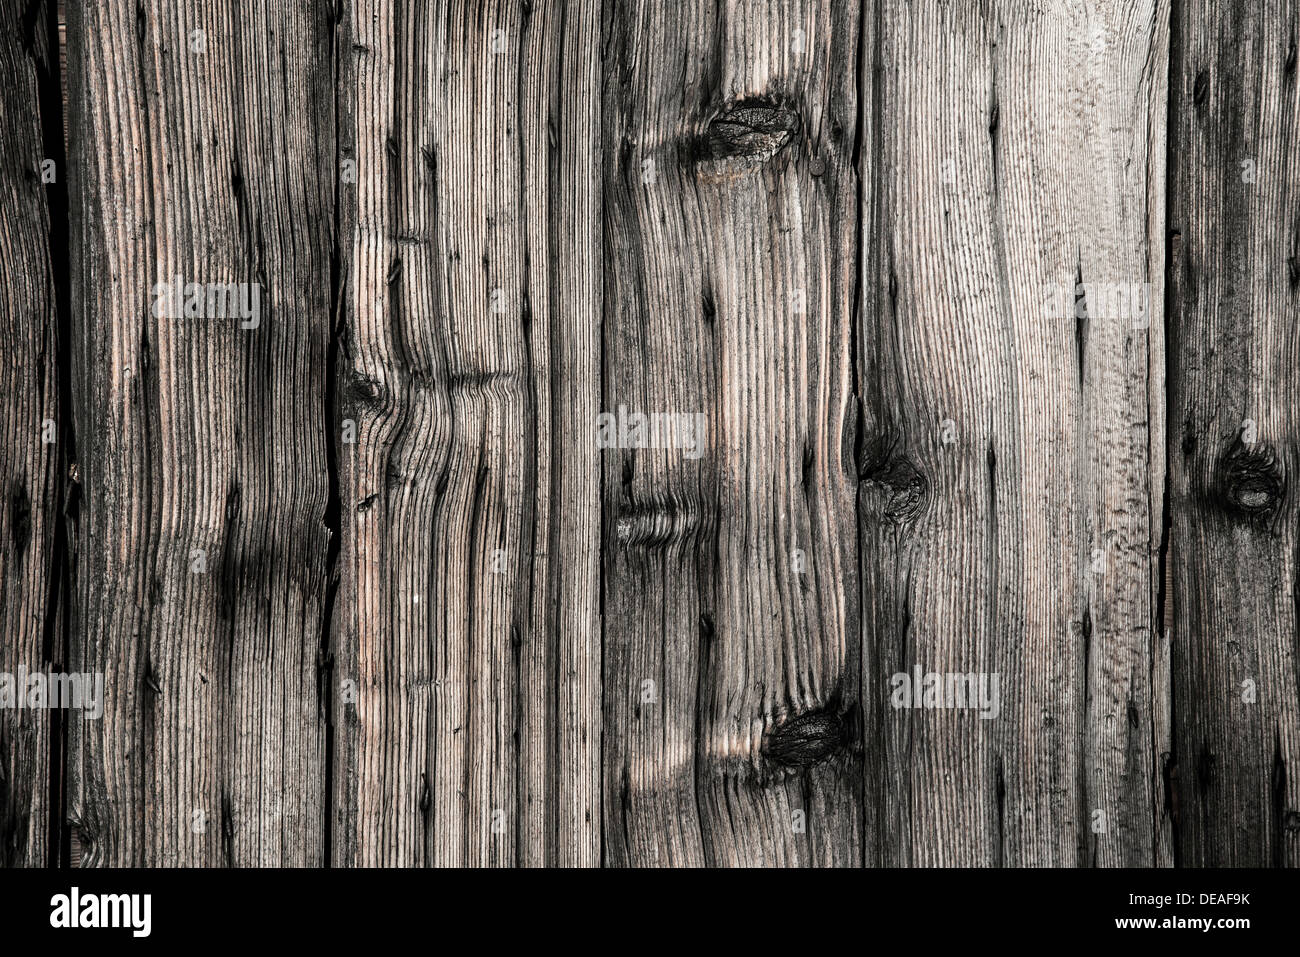 Wood grain in detail, Forcalquier, Provence, Provence-Alpes-Cote, France, Europe Stock Photo